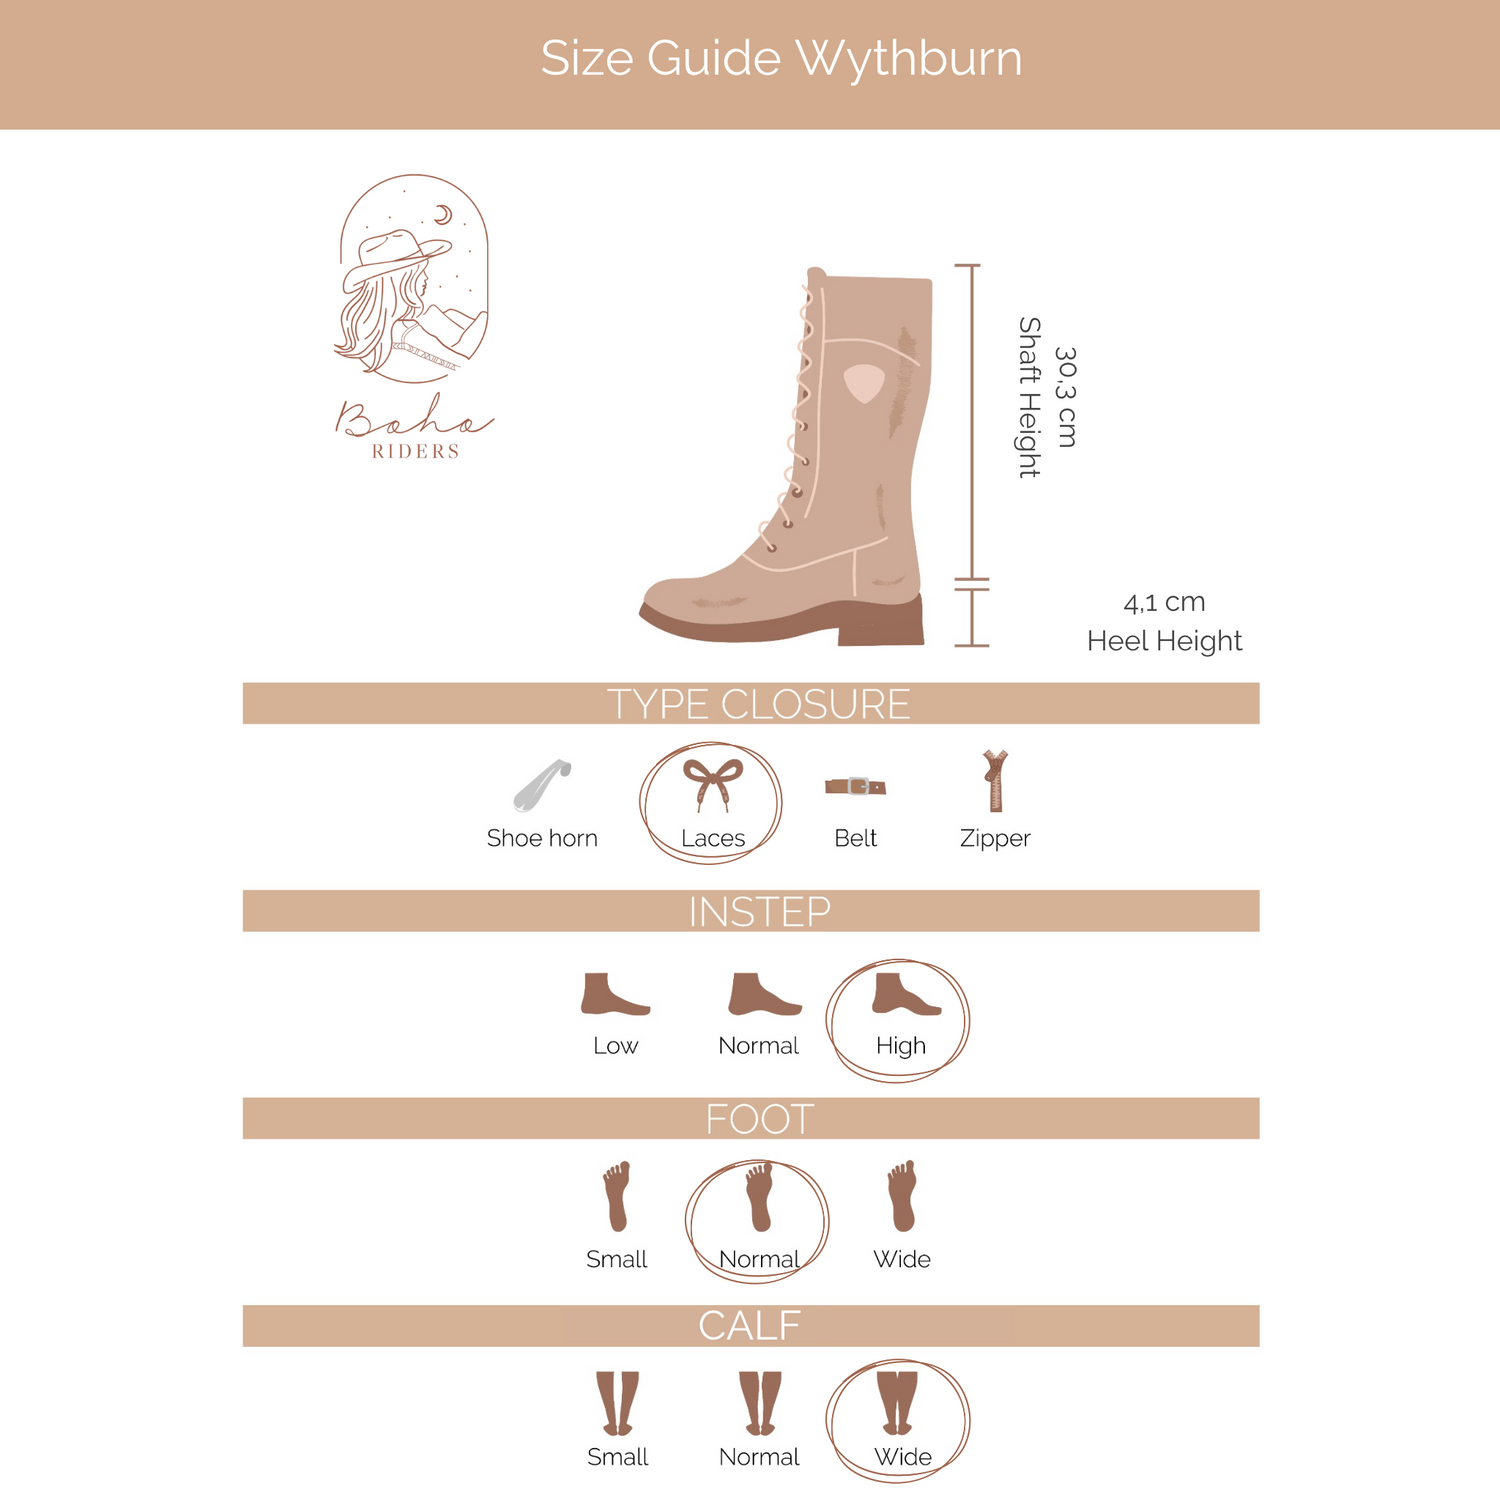 What you want to know about the fit ofARIAT WYTHBURN 2 H2O WATERPROOF - RIDING BOOTS - OUTDOOR BOOT - WHEATERED BROWN